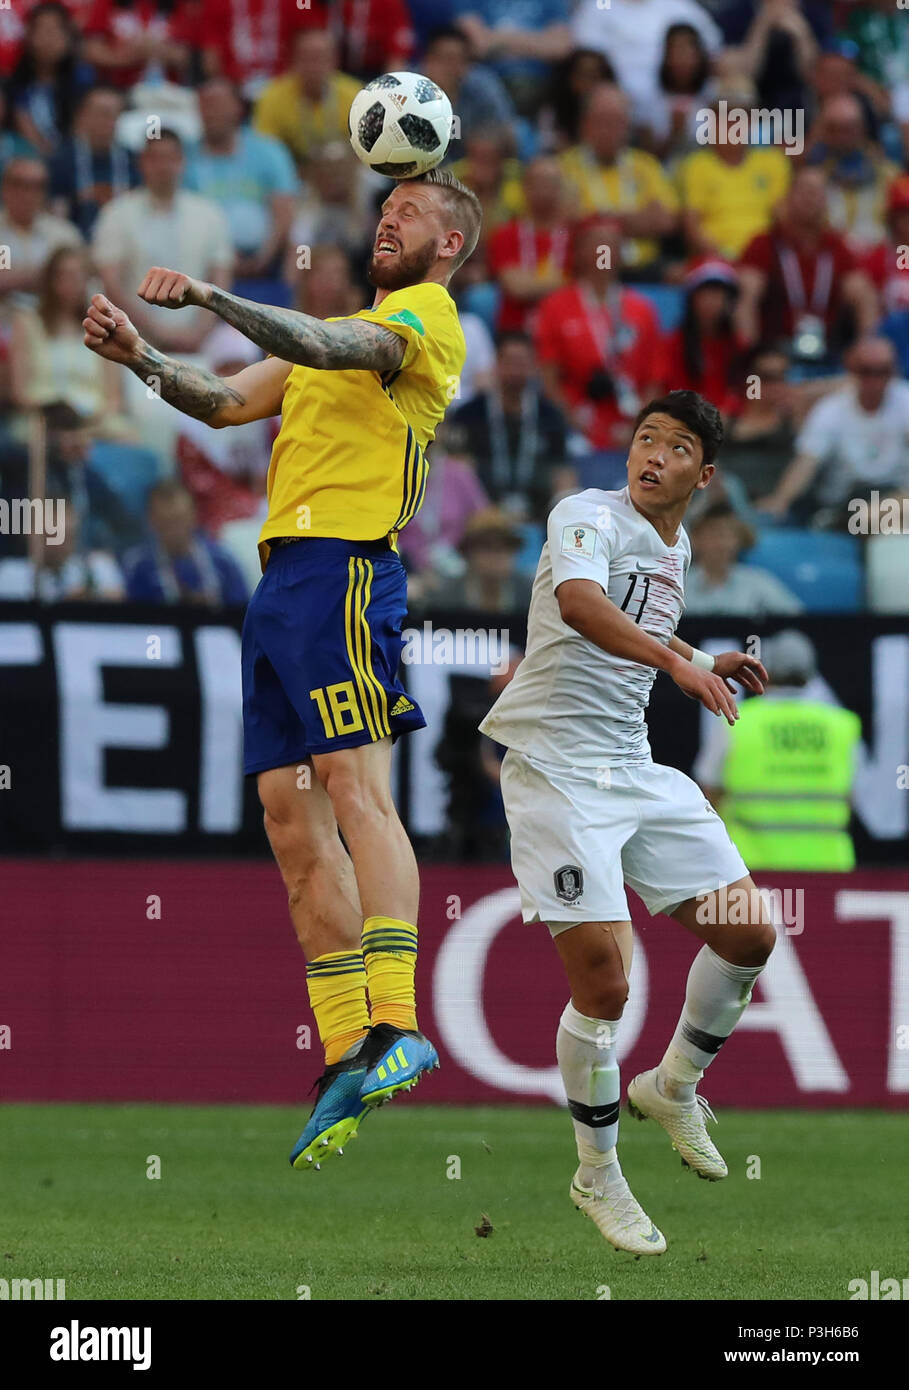 Nizhny Novgorod, Russia. 18th June, 2018. Pontus Jansson (L) of Sweden competes during a group F match between Sweden and South Korea at the 2018 FIFA World Cup in Nizhny Novgorod, Russia, June 18, 2018. Sweden won 1-0. Credit: Yang Lei/Xinhua/Alamy Live News Stock Photo